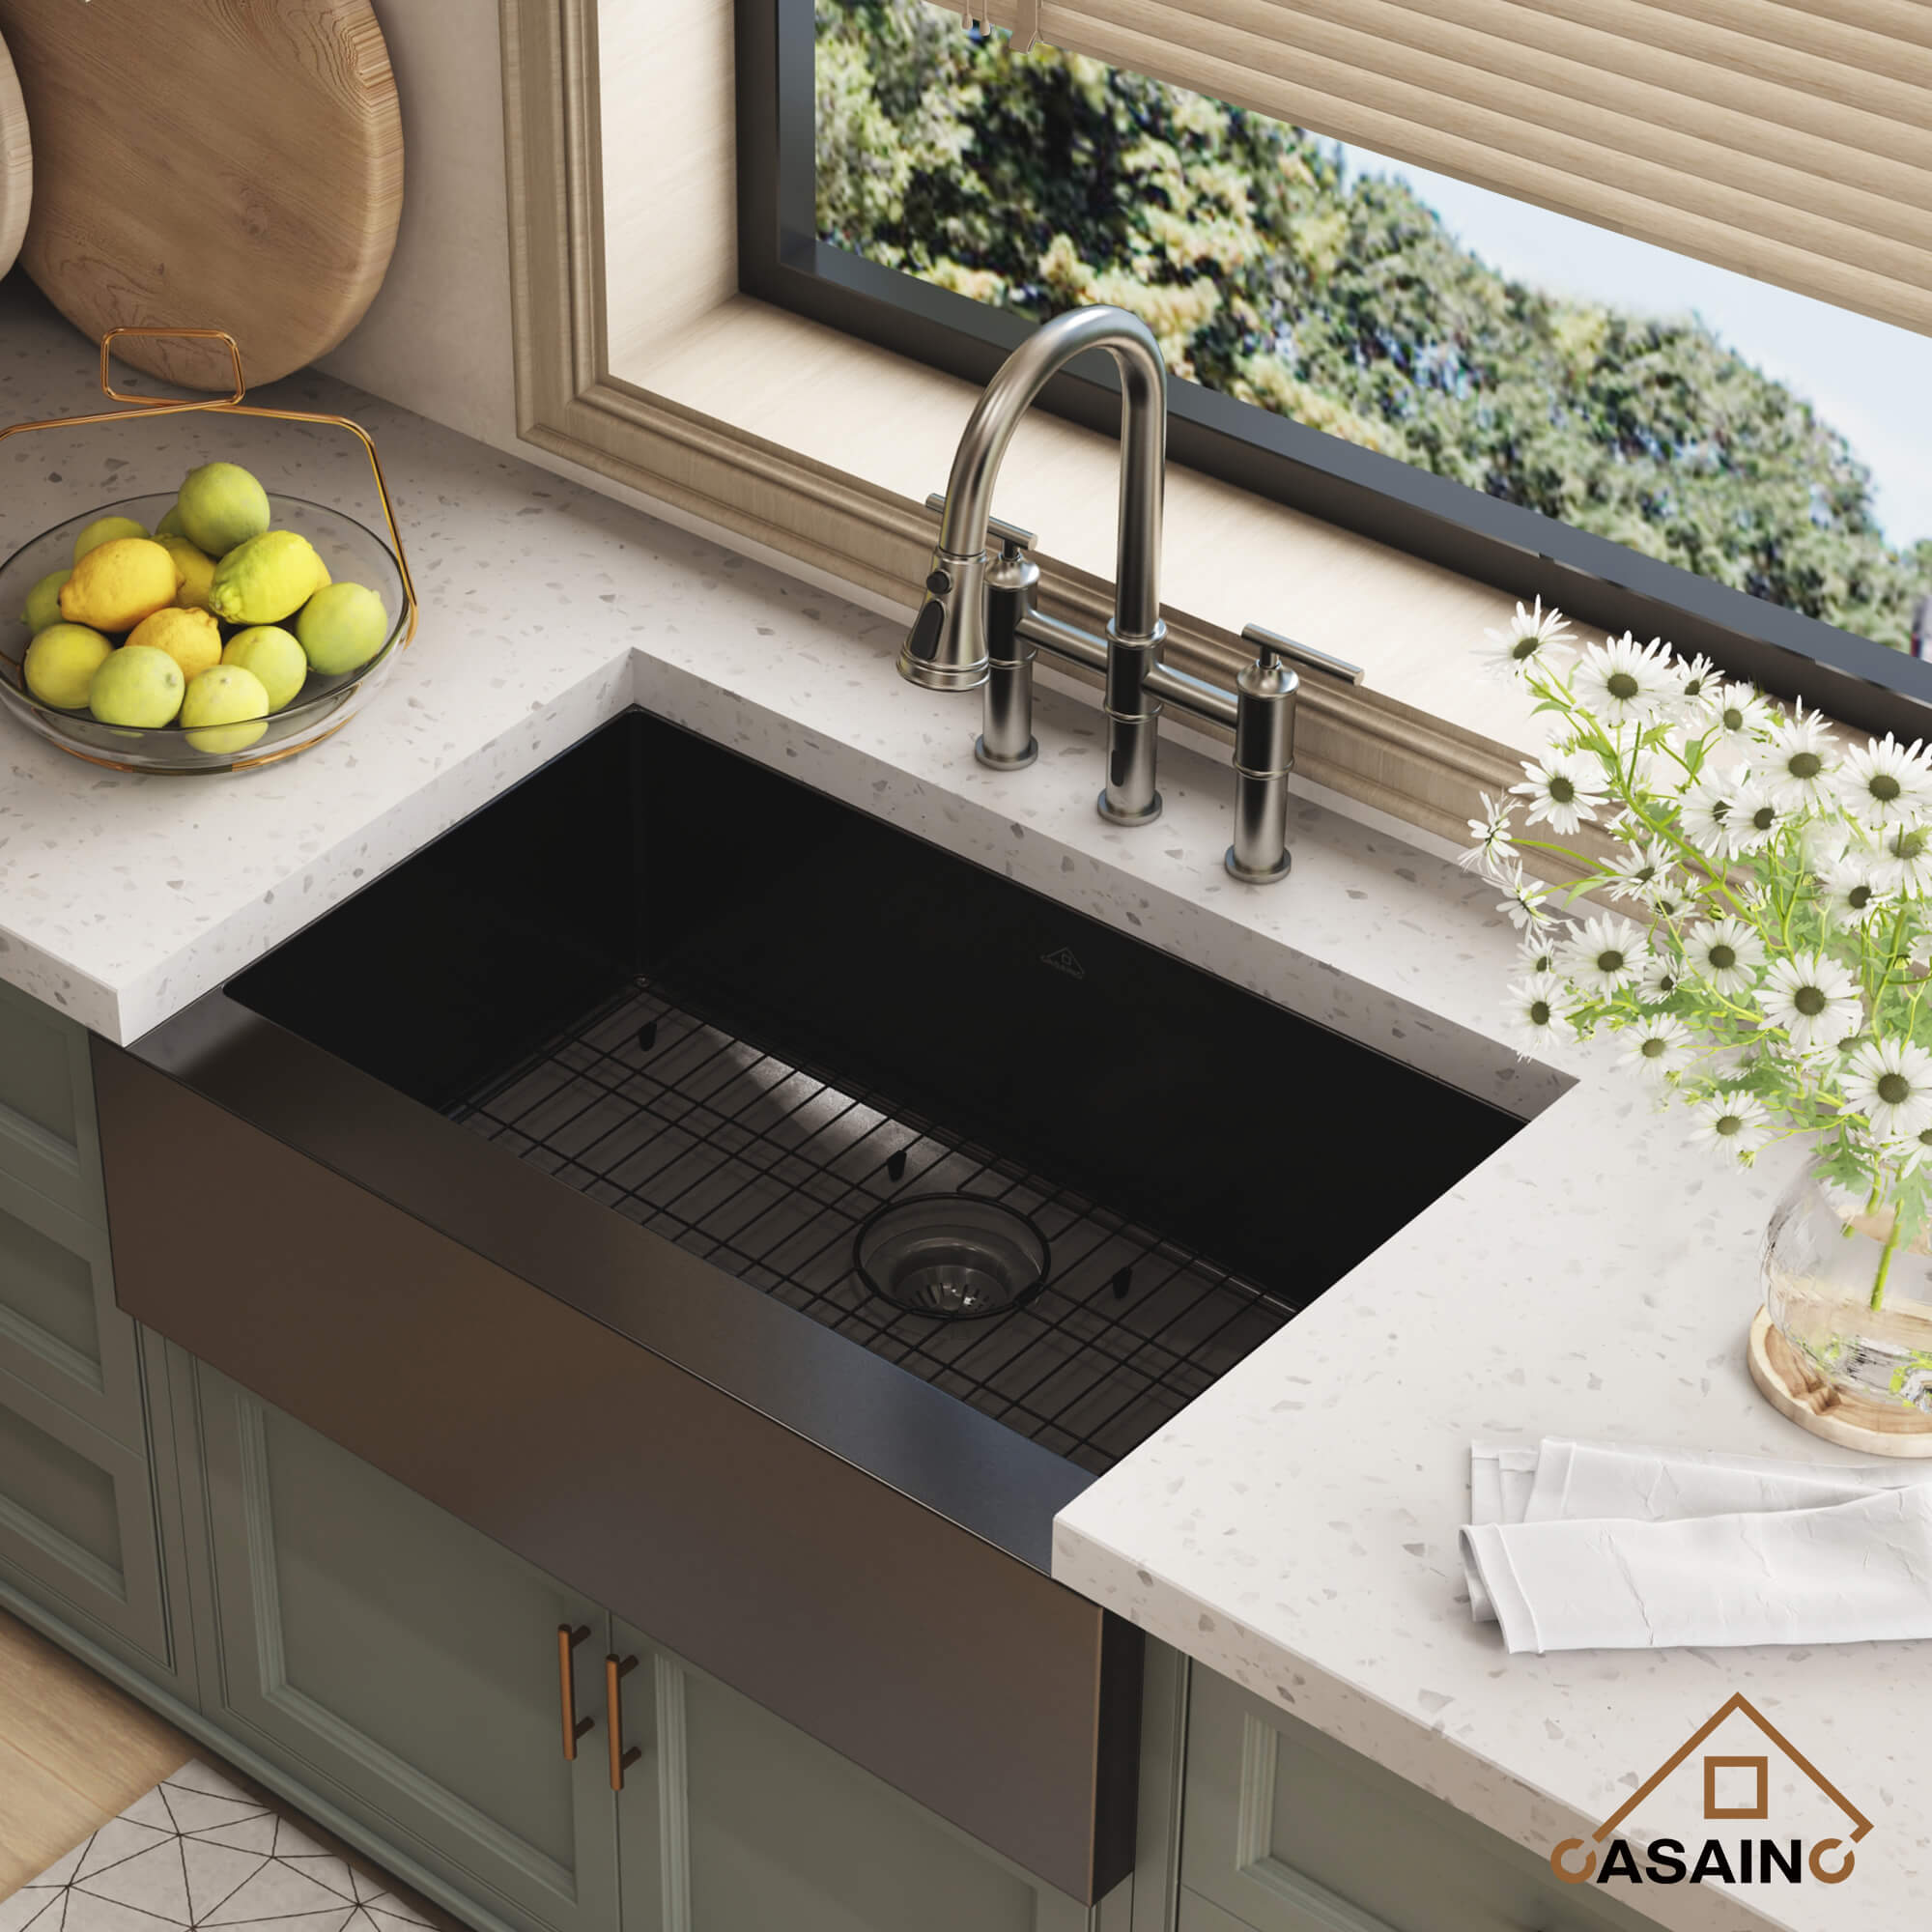 33" Premium 304 Stainless Steel Sink with PVD Finish & Double-Handle Kitchen Faucet with Pull-Out Sprayer